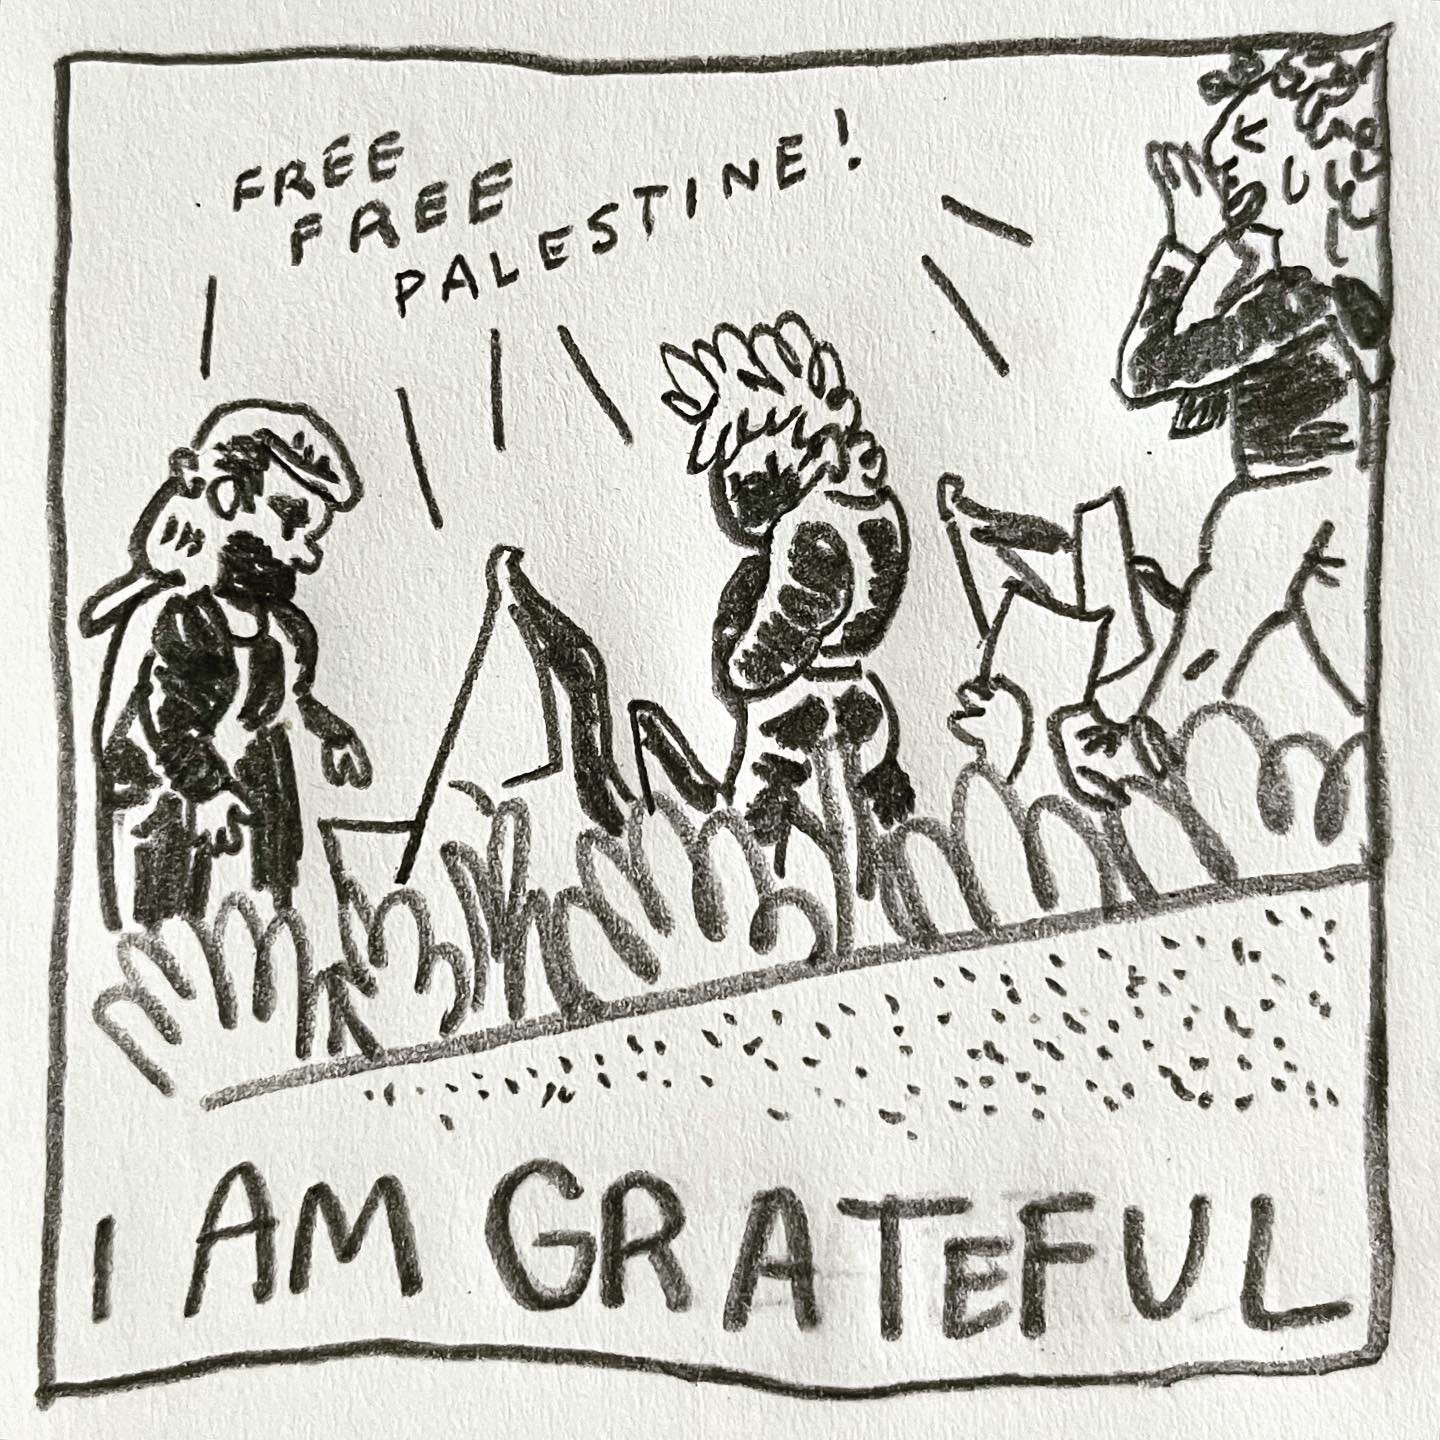 Panel 3: I am grateful Image: a view from below a concrete barrier. Looking up, we see Lark, wearing a mask and a black jacket, looking backwards and down at us. Bushes are in the foreground. People holding flags and signs march past in the same direction as Lark. Many voices are chanting “free free Palestine!"